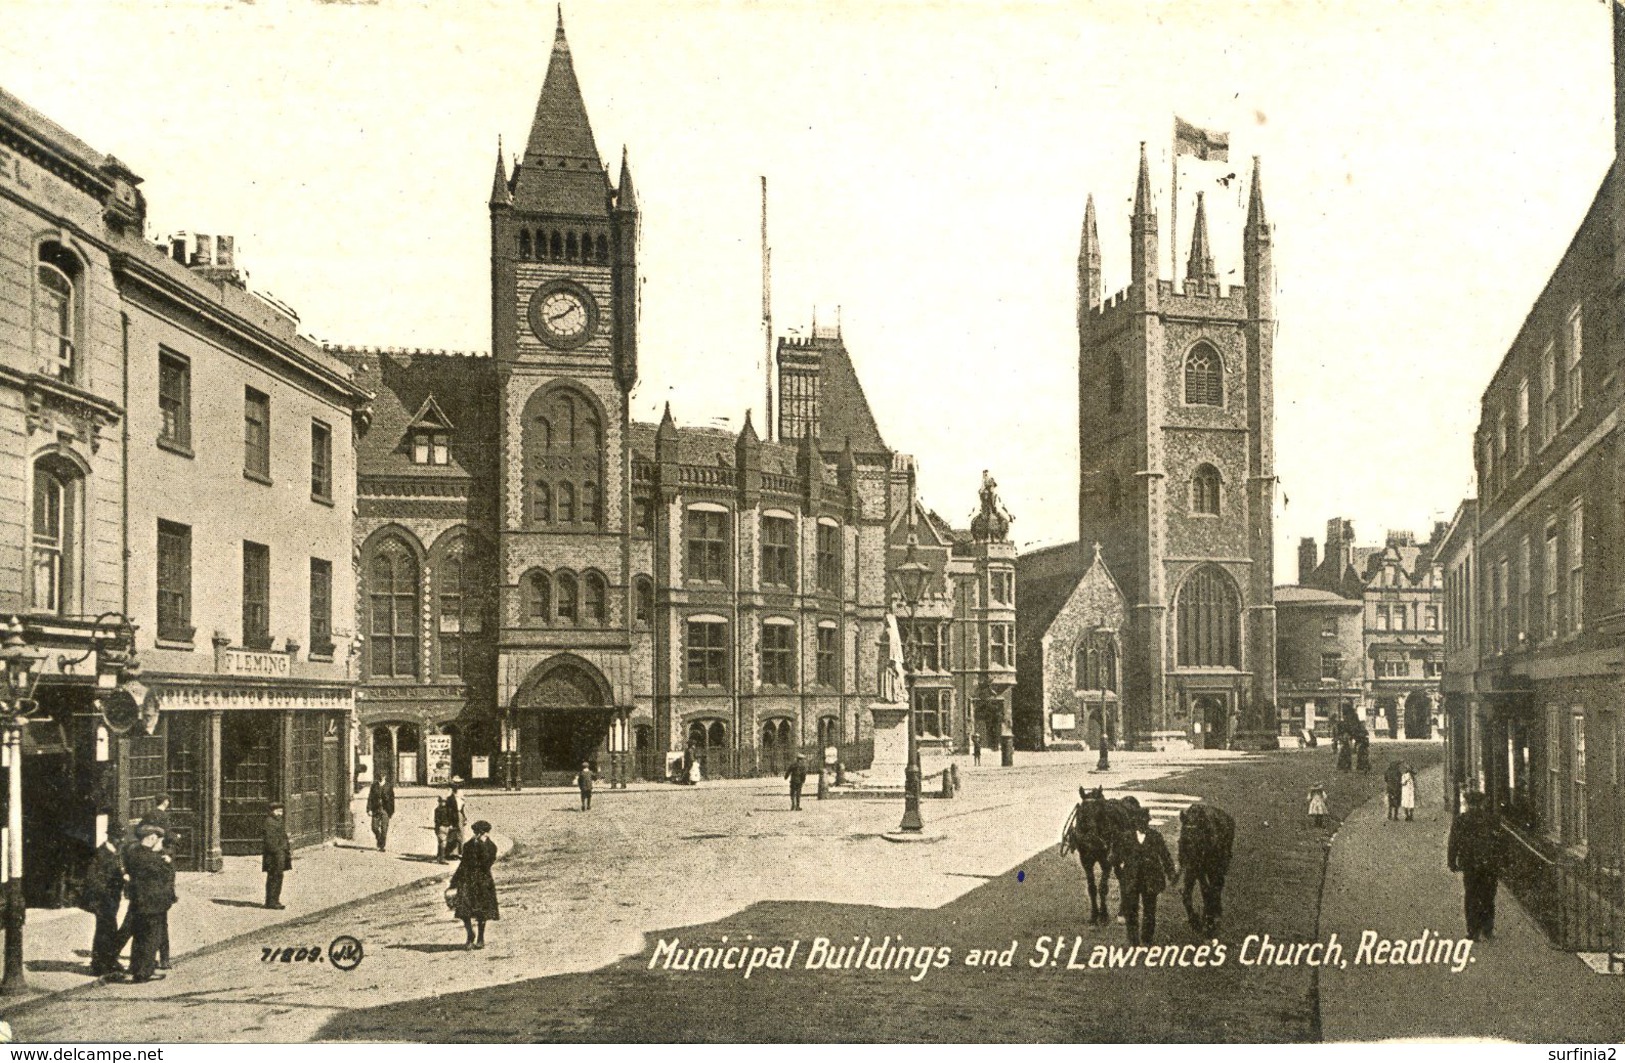 BERKS - READING - MUNICIPAL BUILDINGS AND ST LARENCE'S CHURCH Be267 - Reading